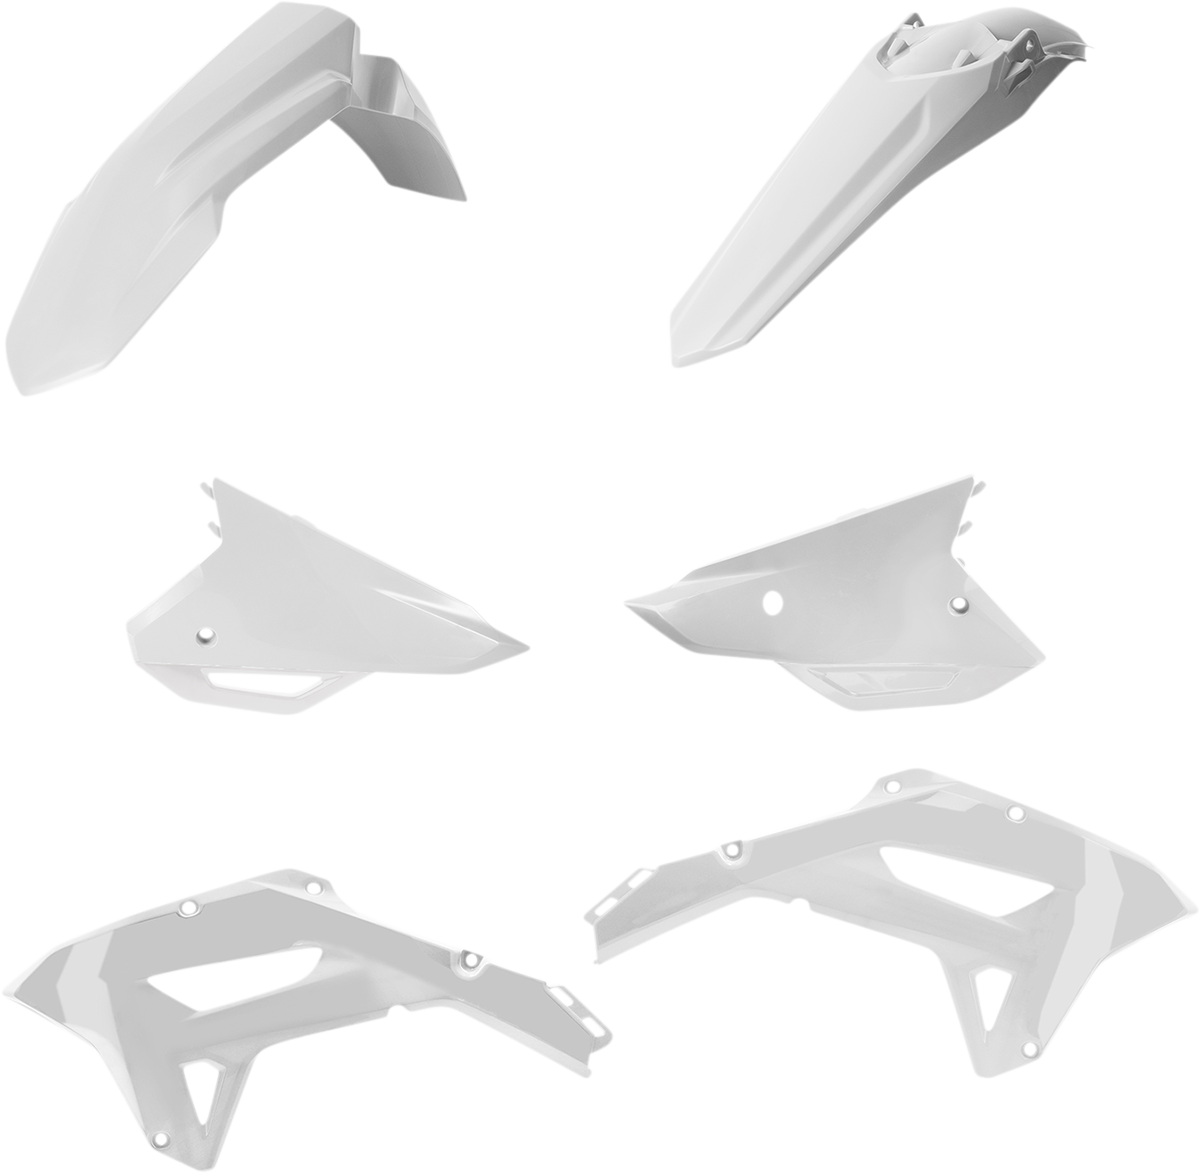 ACERBIS Standard Replacement Body Kit - White 2861790002